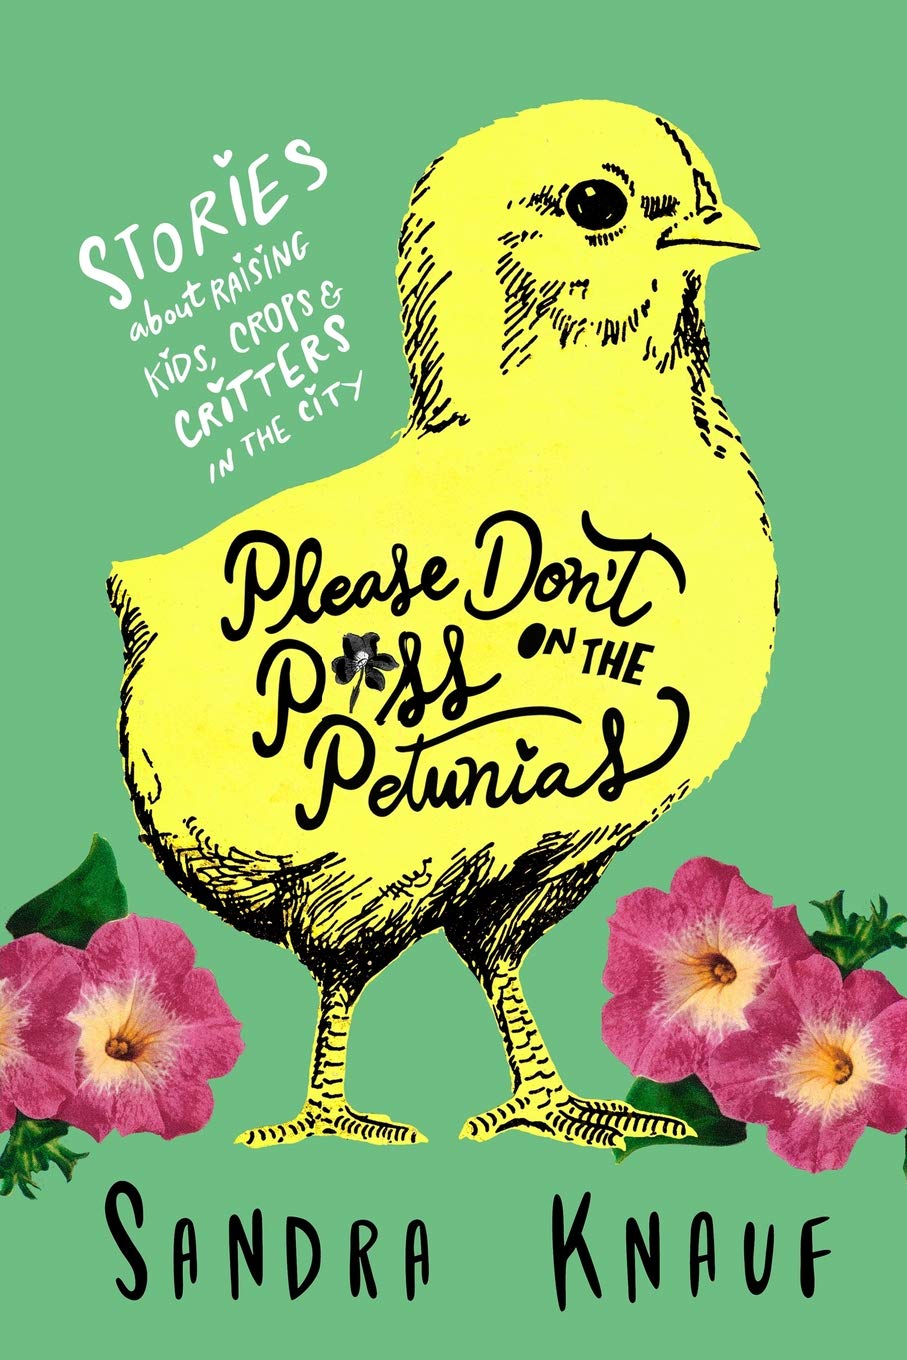 Please Don't Piss on the Petunias: Stories About Raising Kids, Crops & Critters in the City